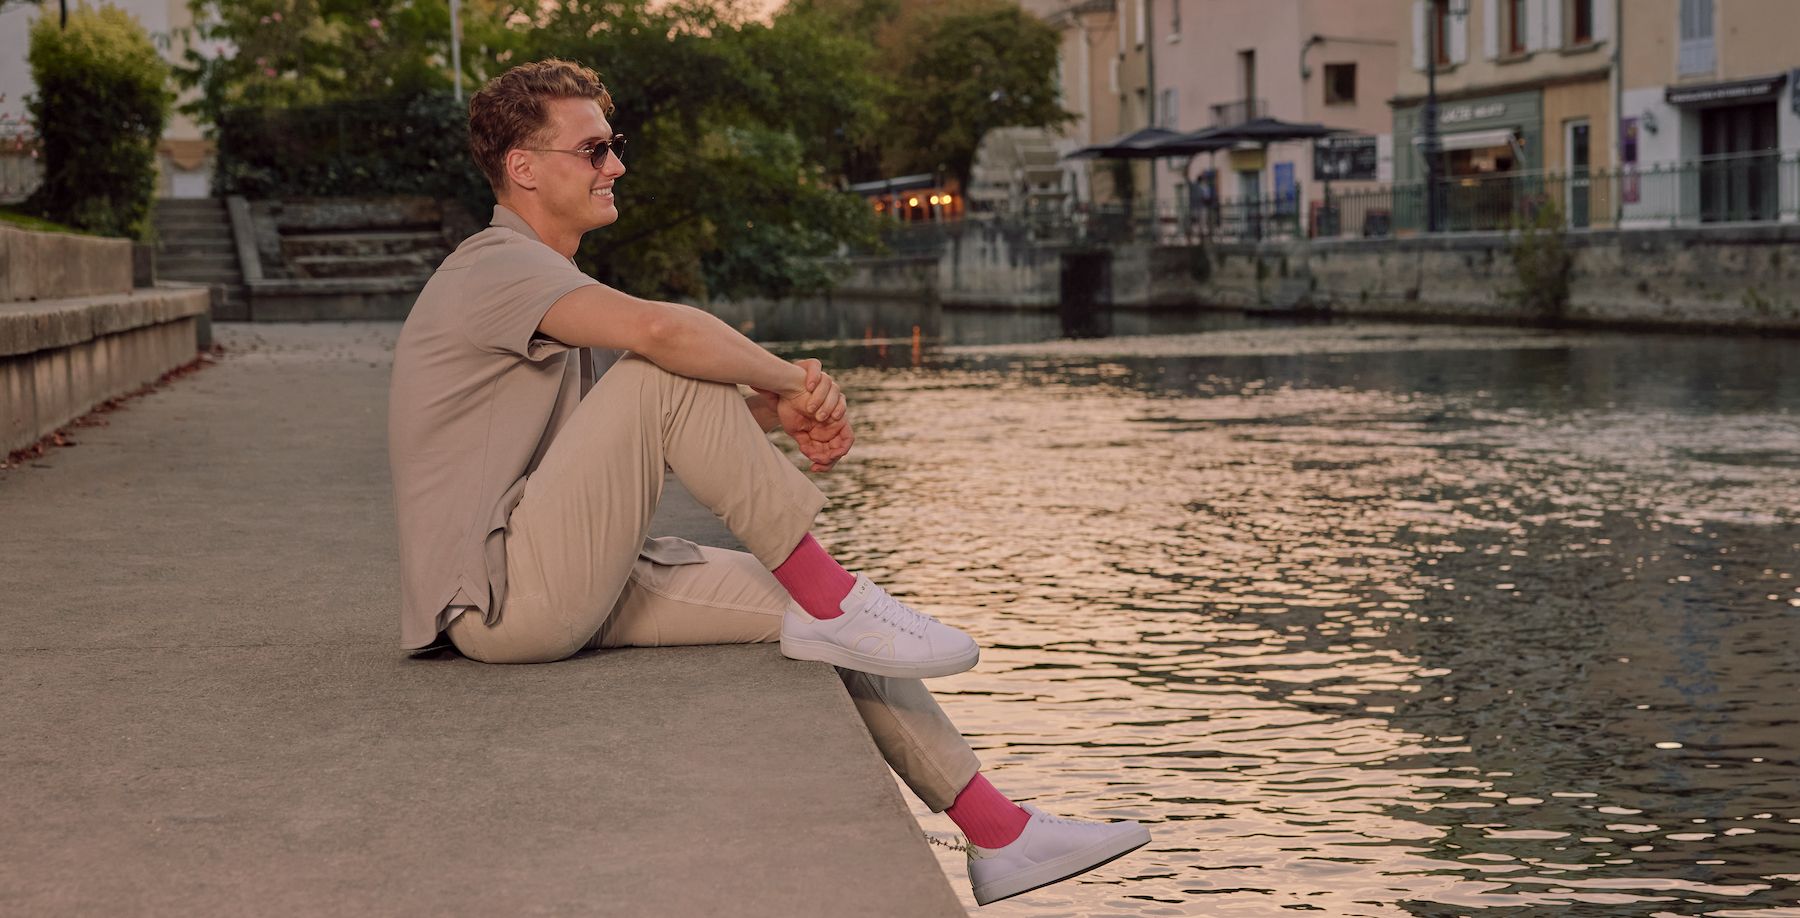 Men’s Style Tips: Socks to wear with chinos